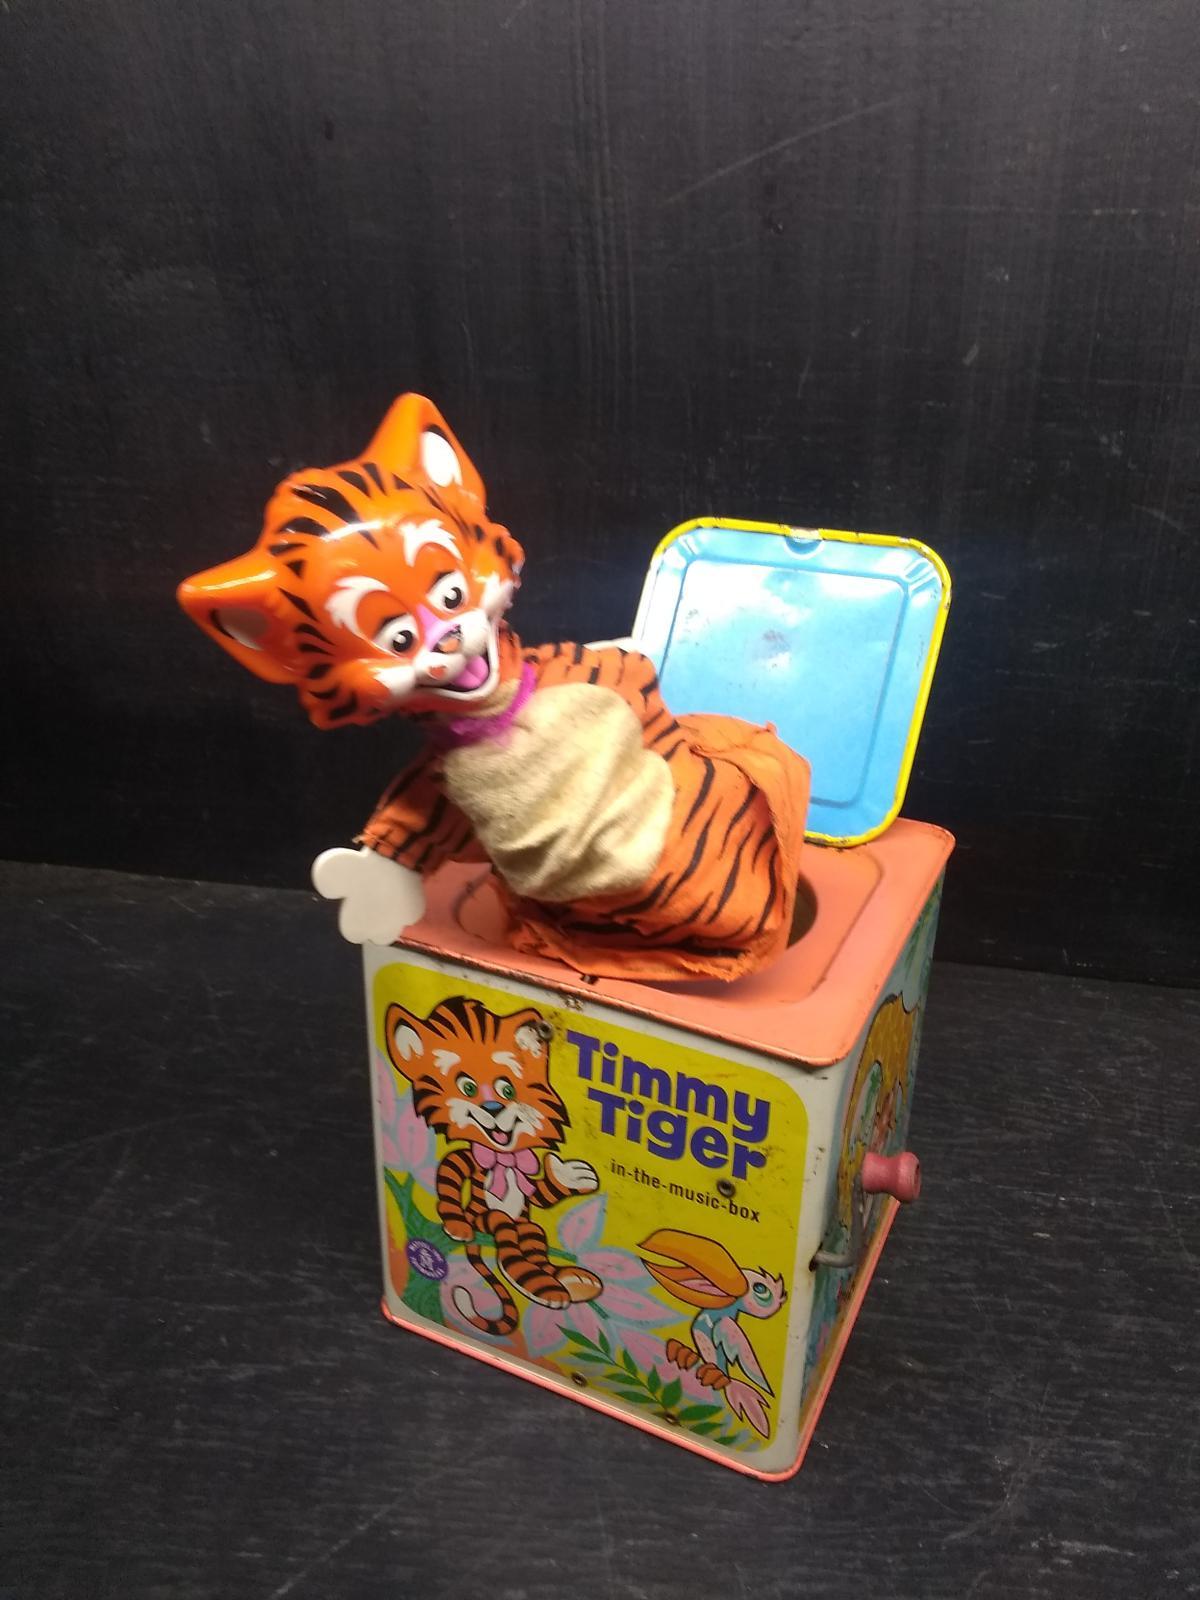 Vintage Tin Lithograph Timmy Tiger "Jack in the Box"